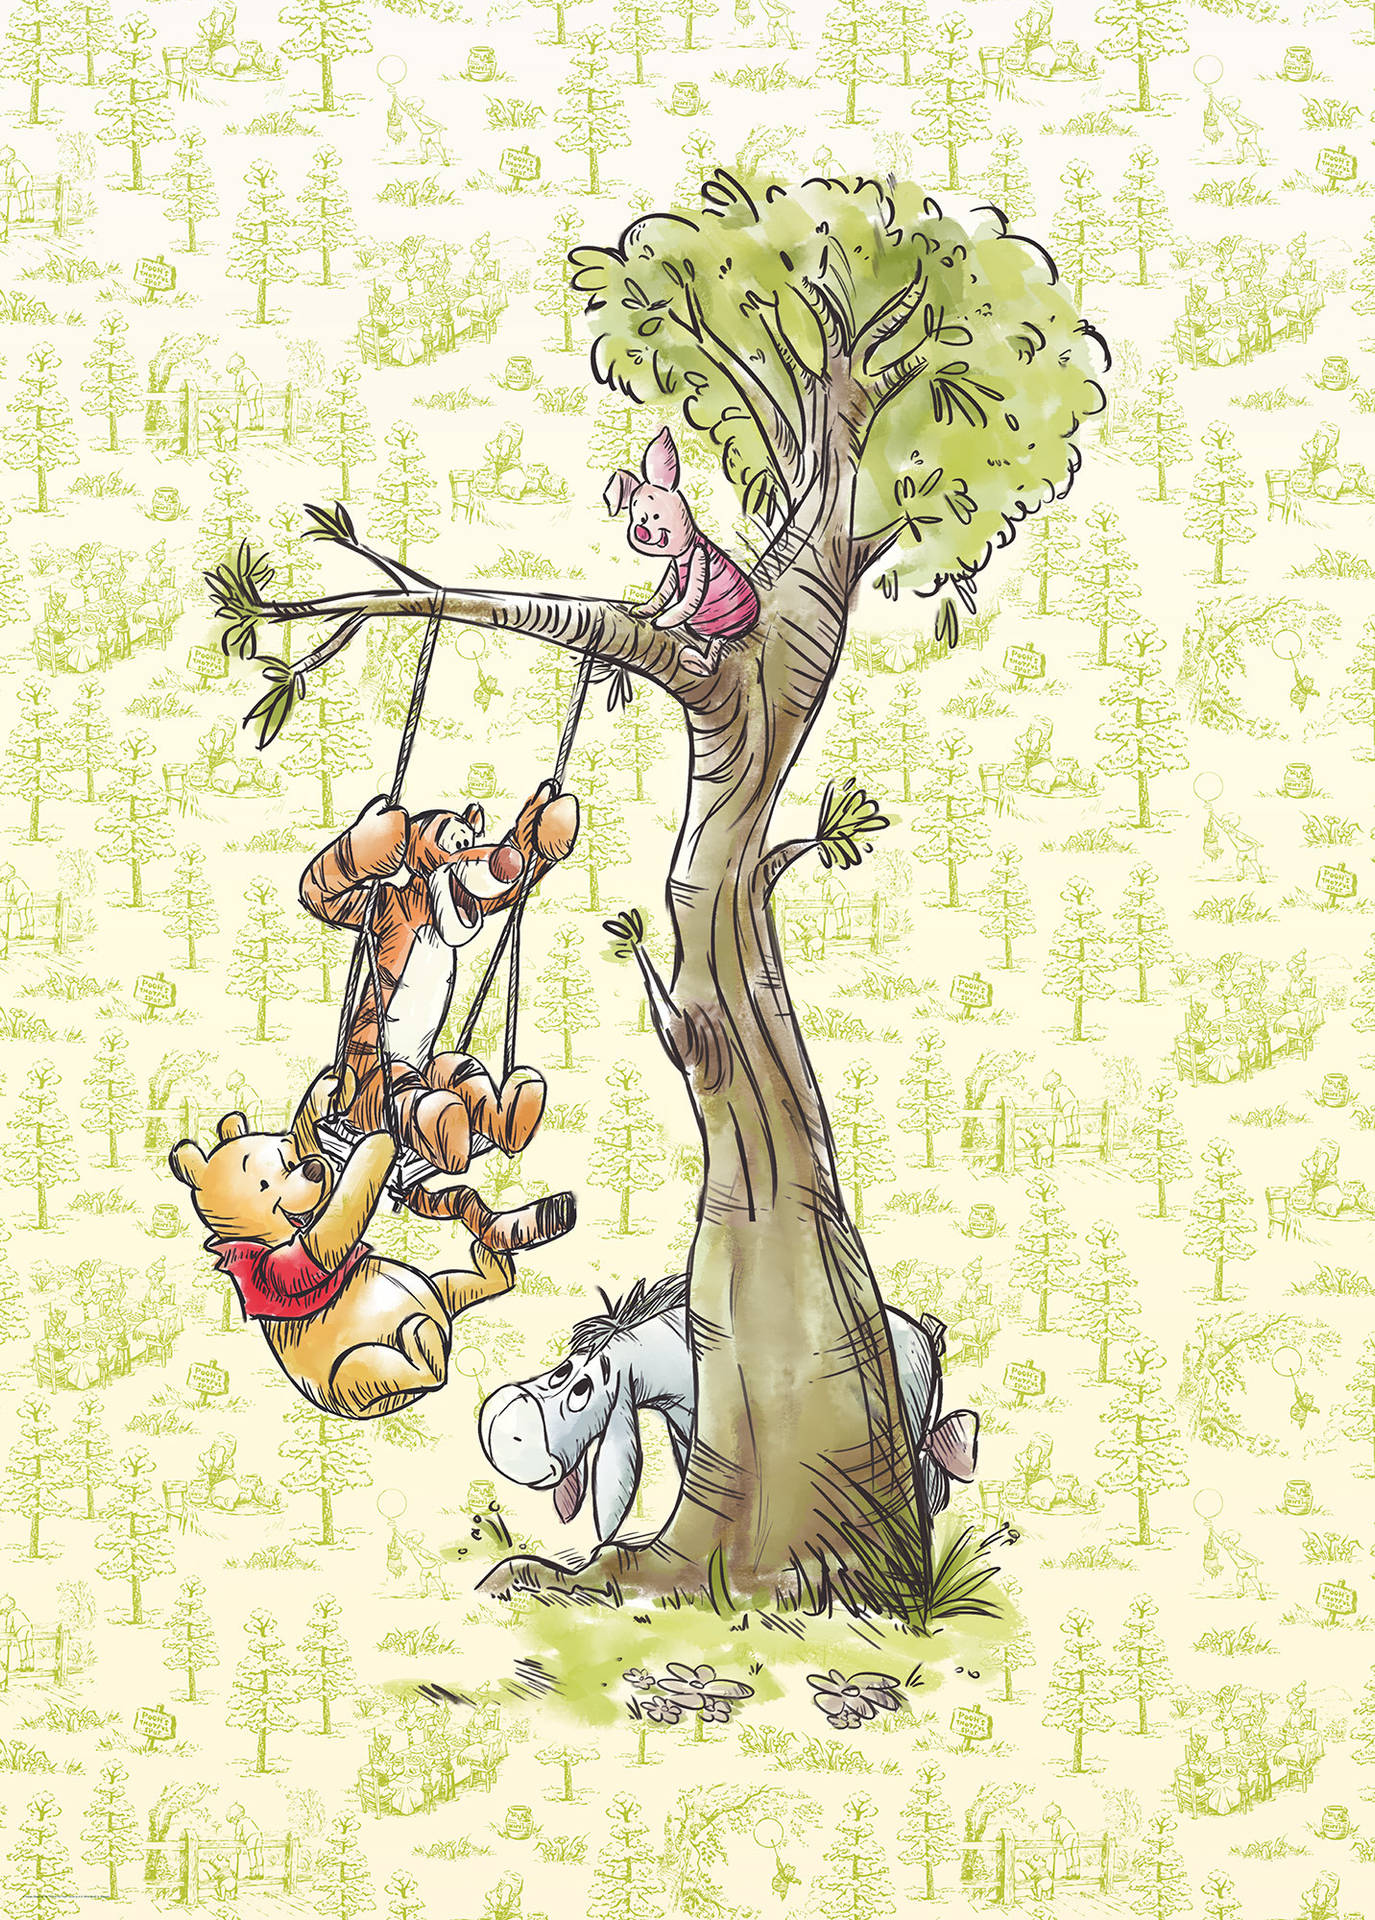 Top 999+ Cute Winnie The Pooh Iphone Wallpaper Full HD, 4K Free to Use